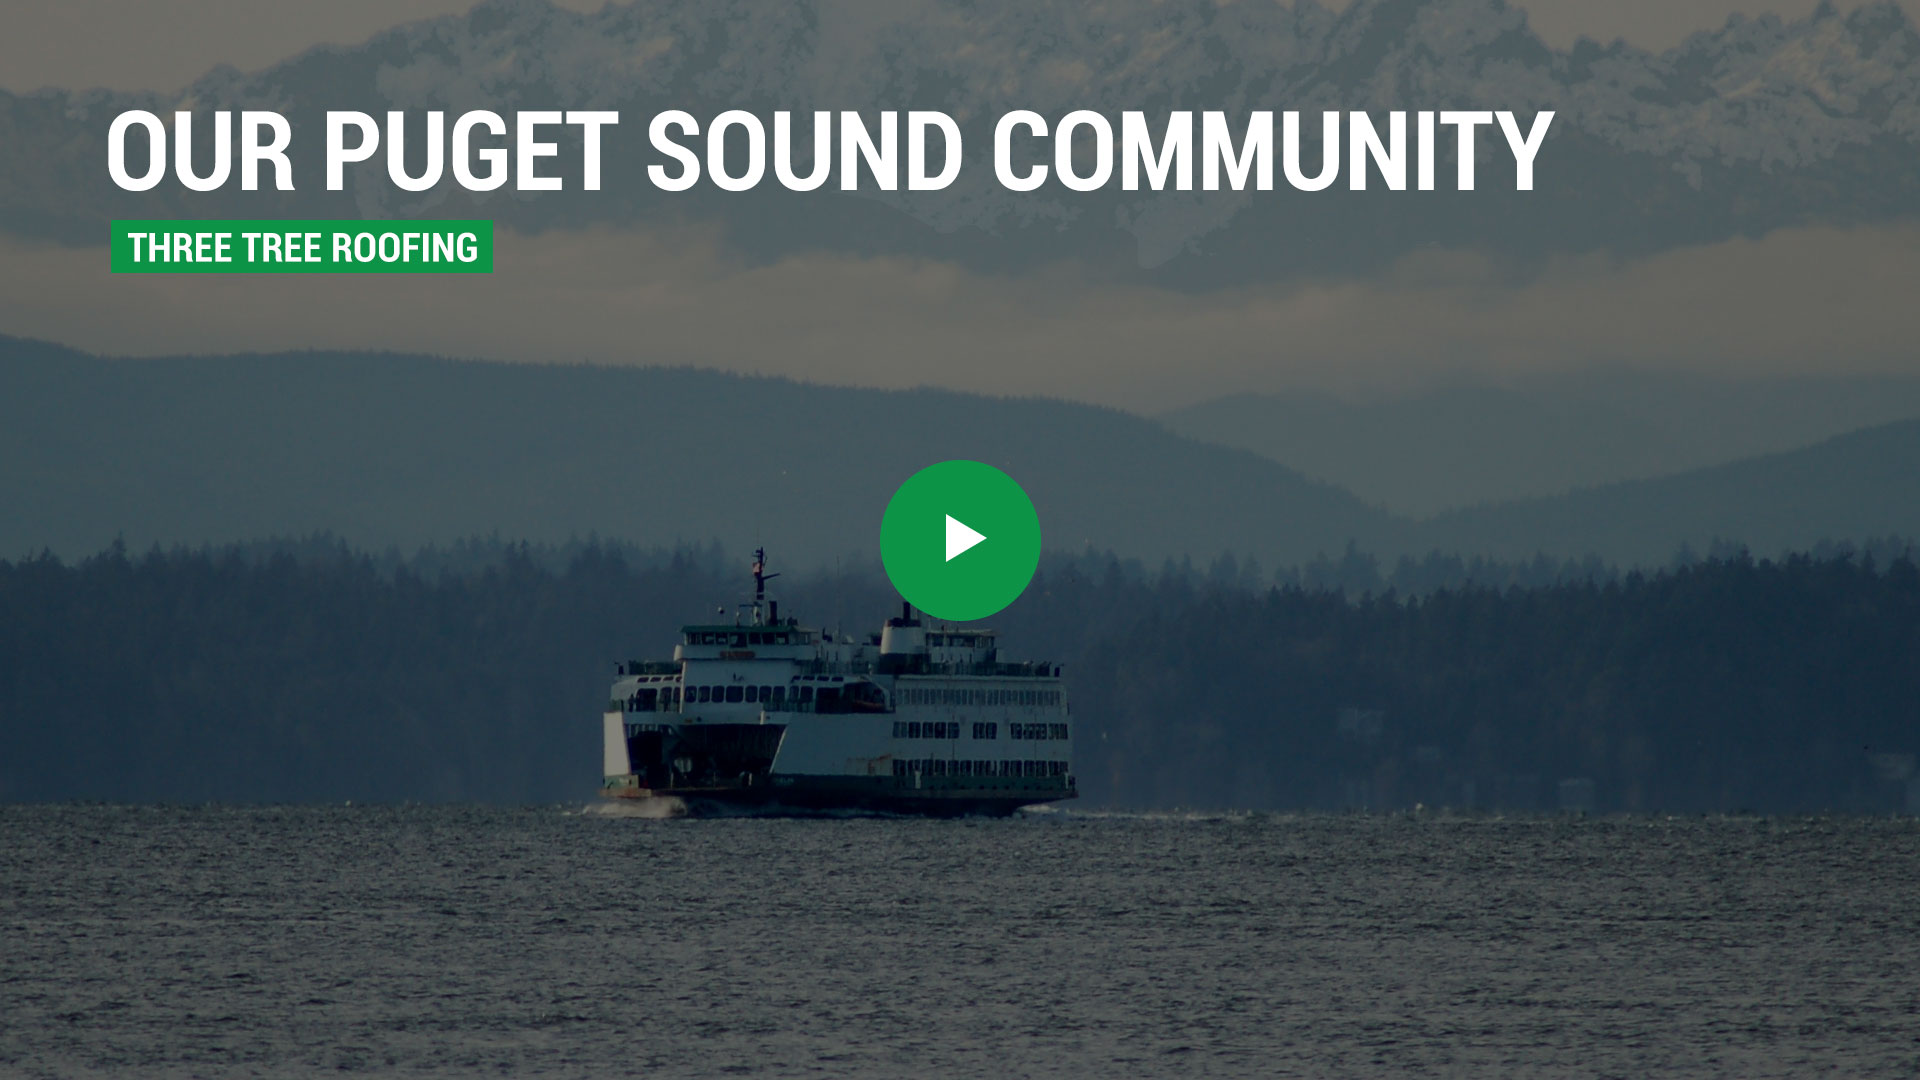 Our Puget Sound Community